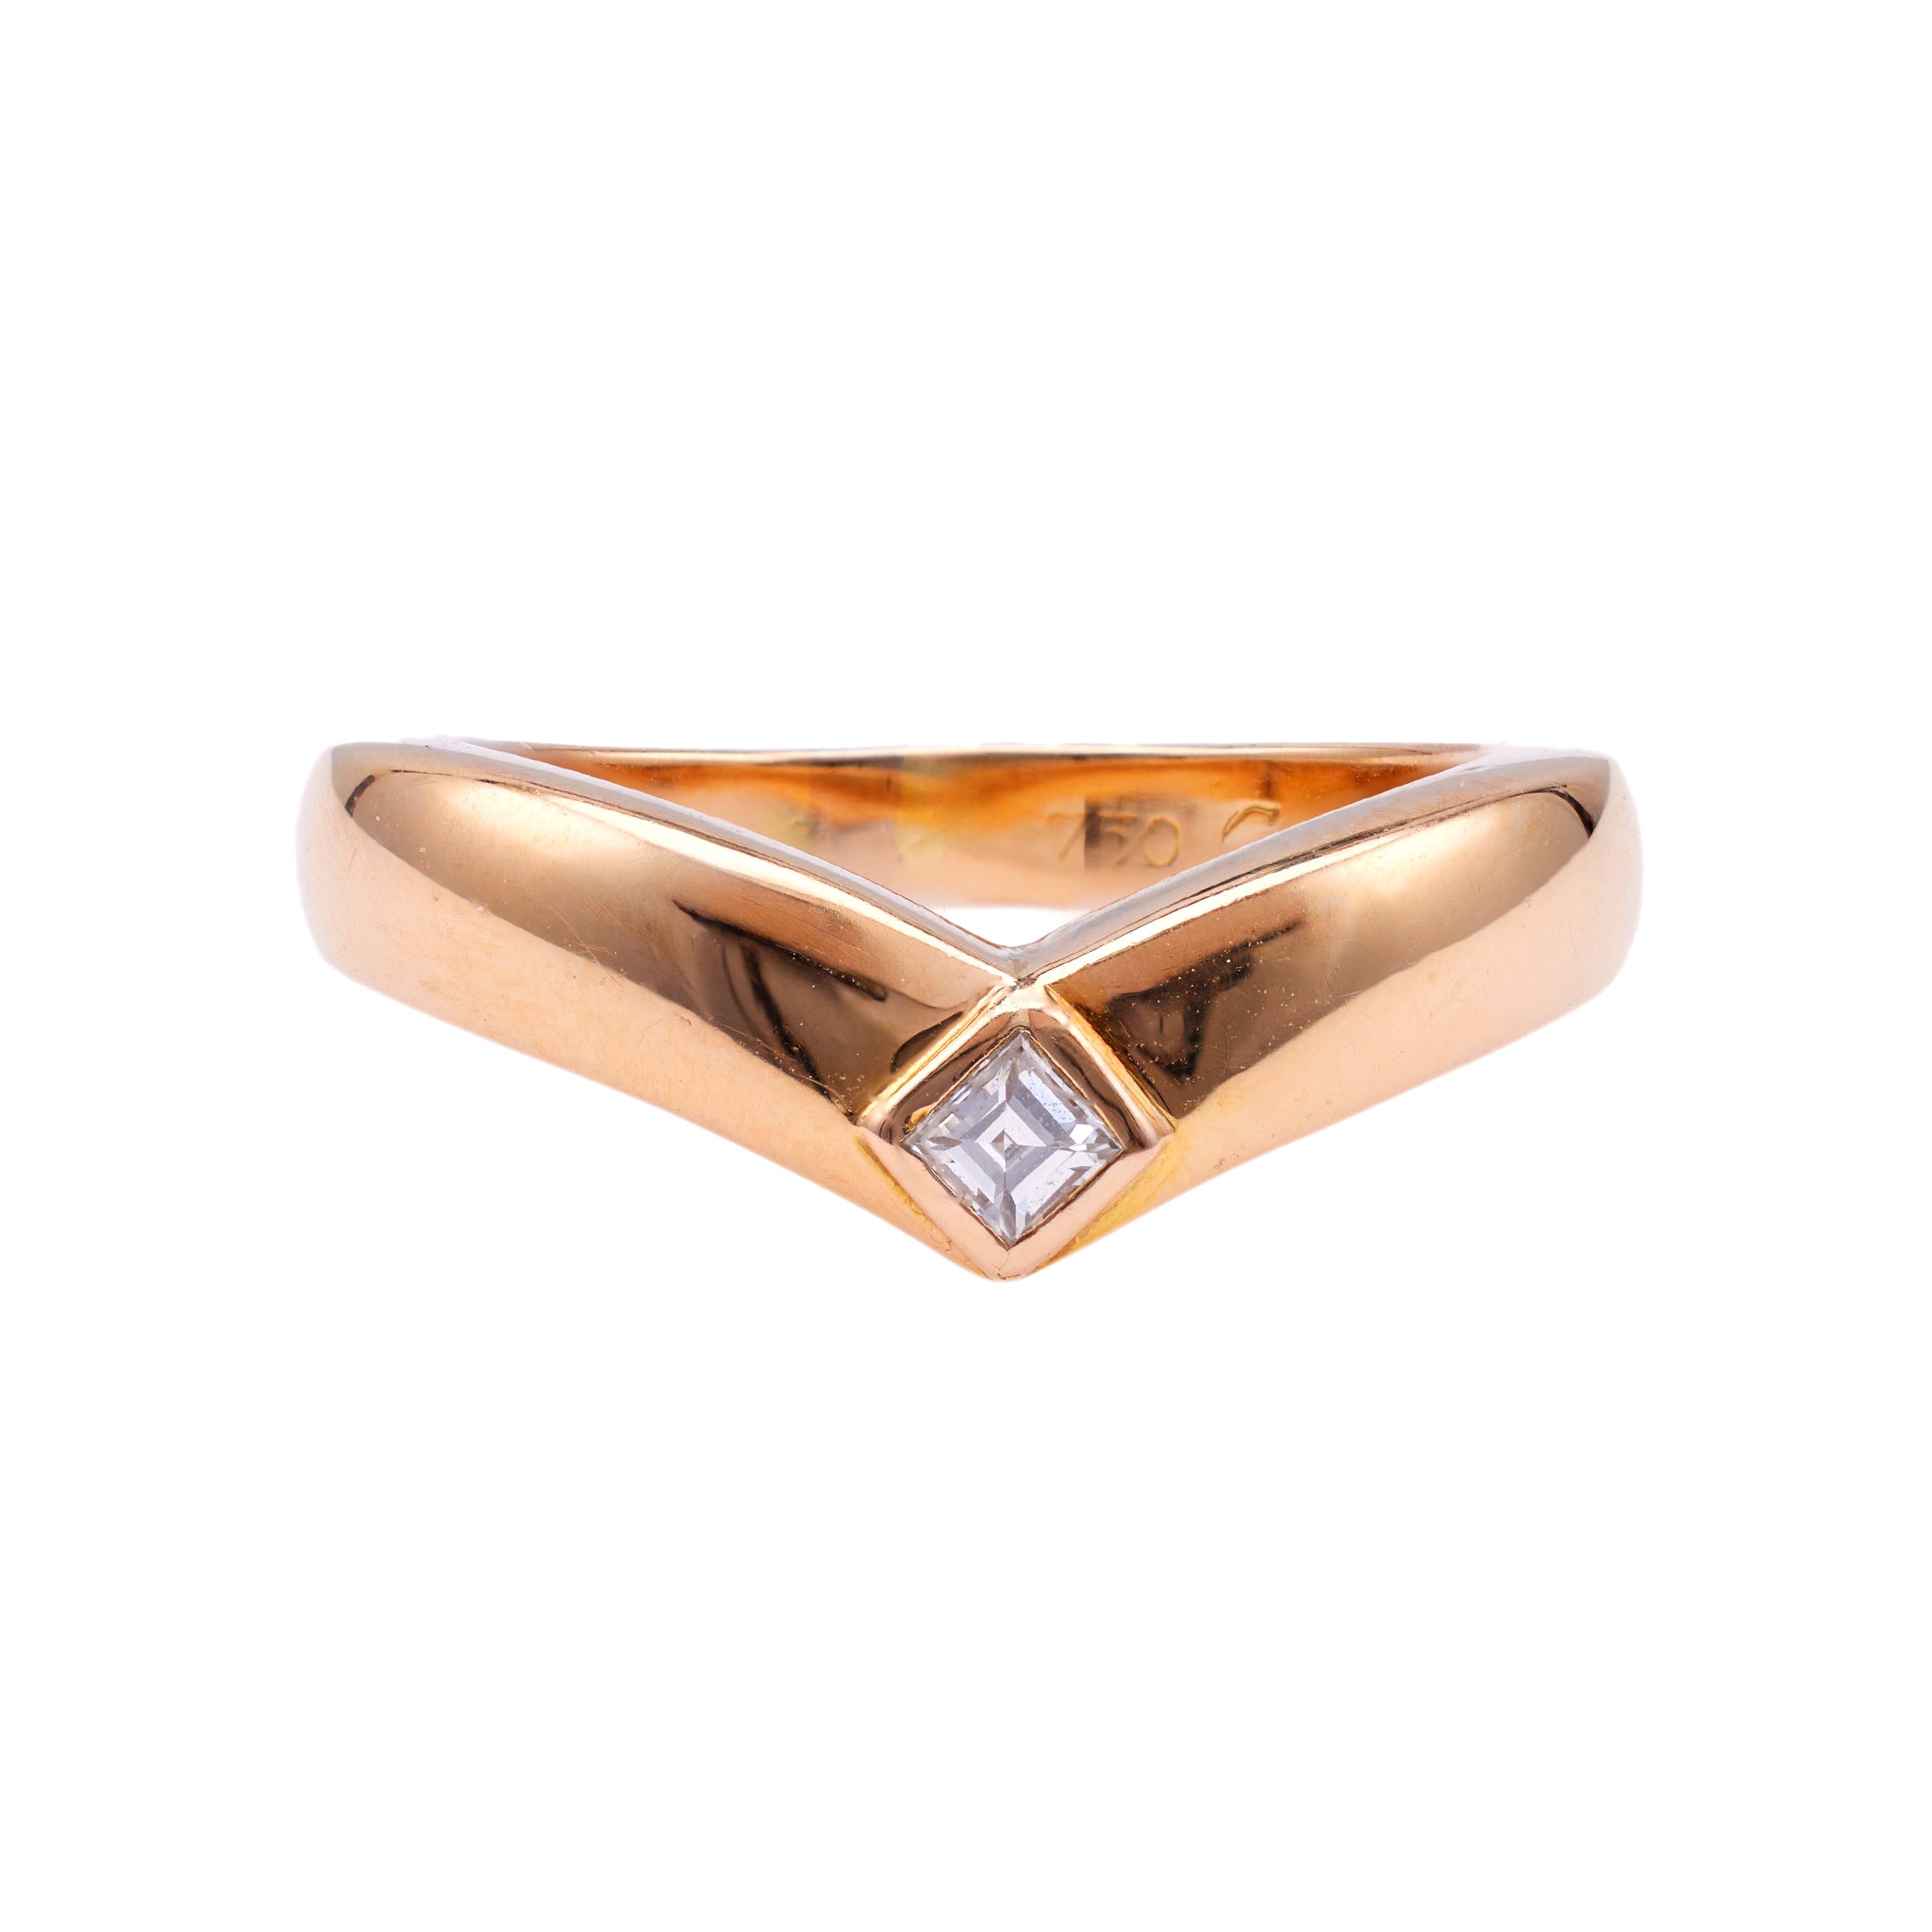 Vintage Cartier Diamond 18k Rose Gold Chevron Band Ring Rings Jack Weir & Sons   